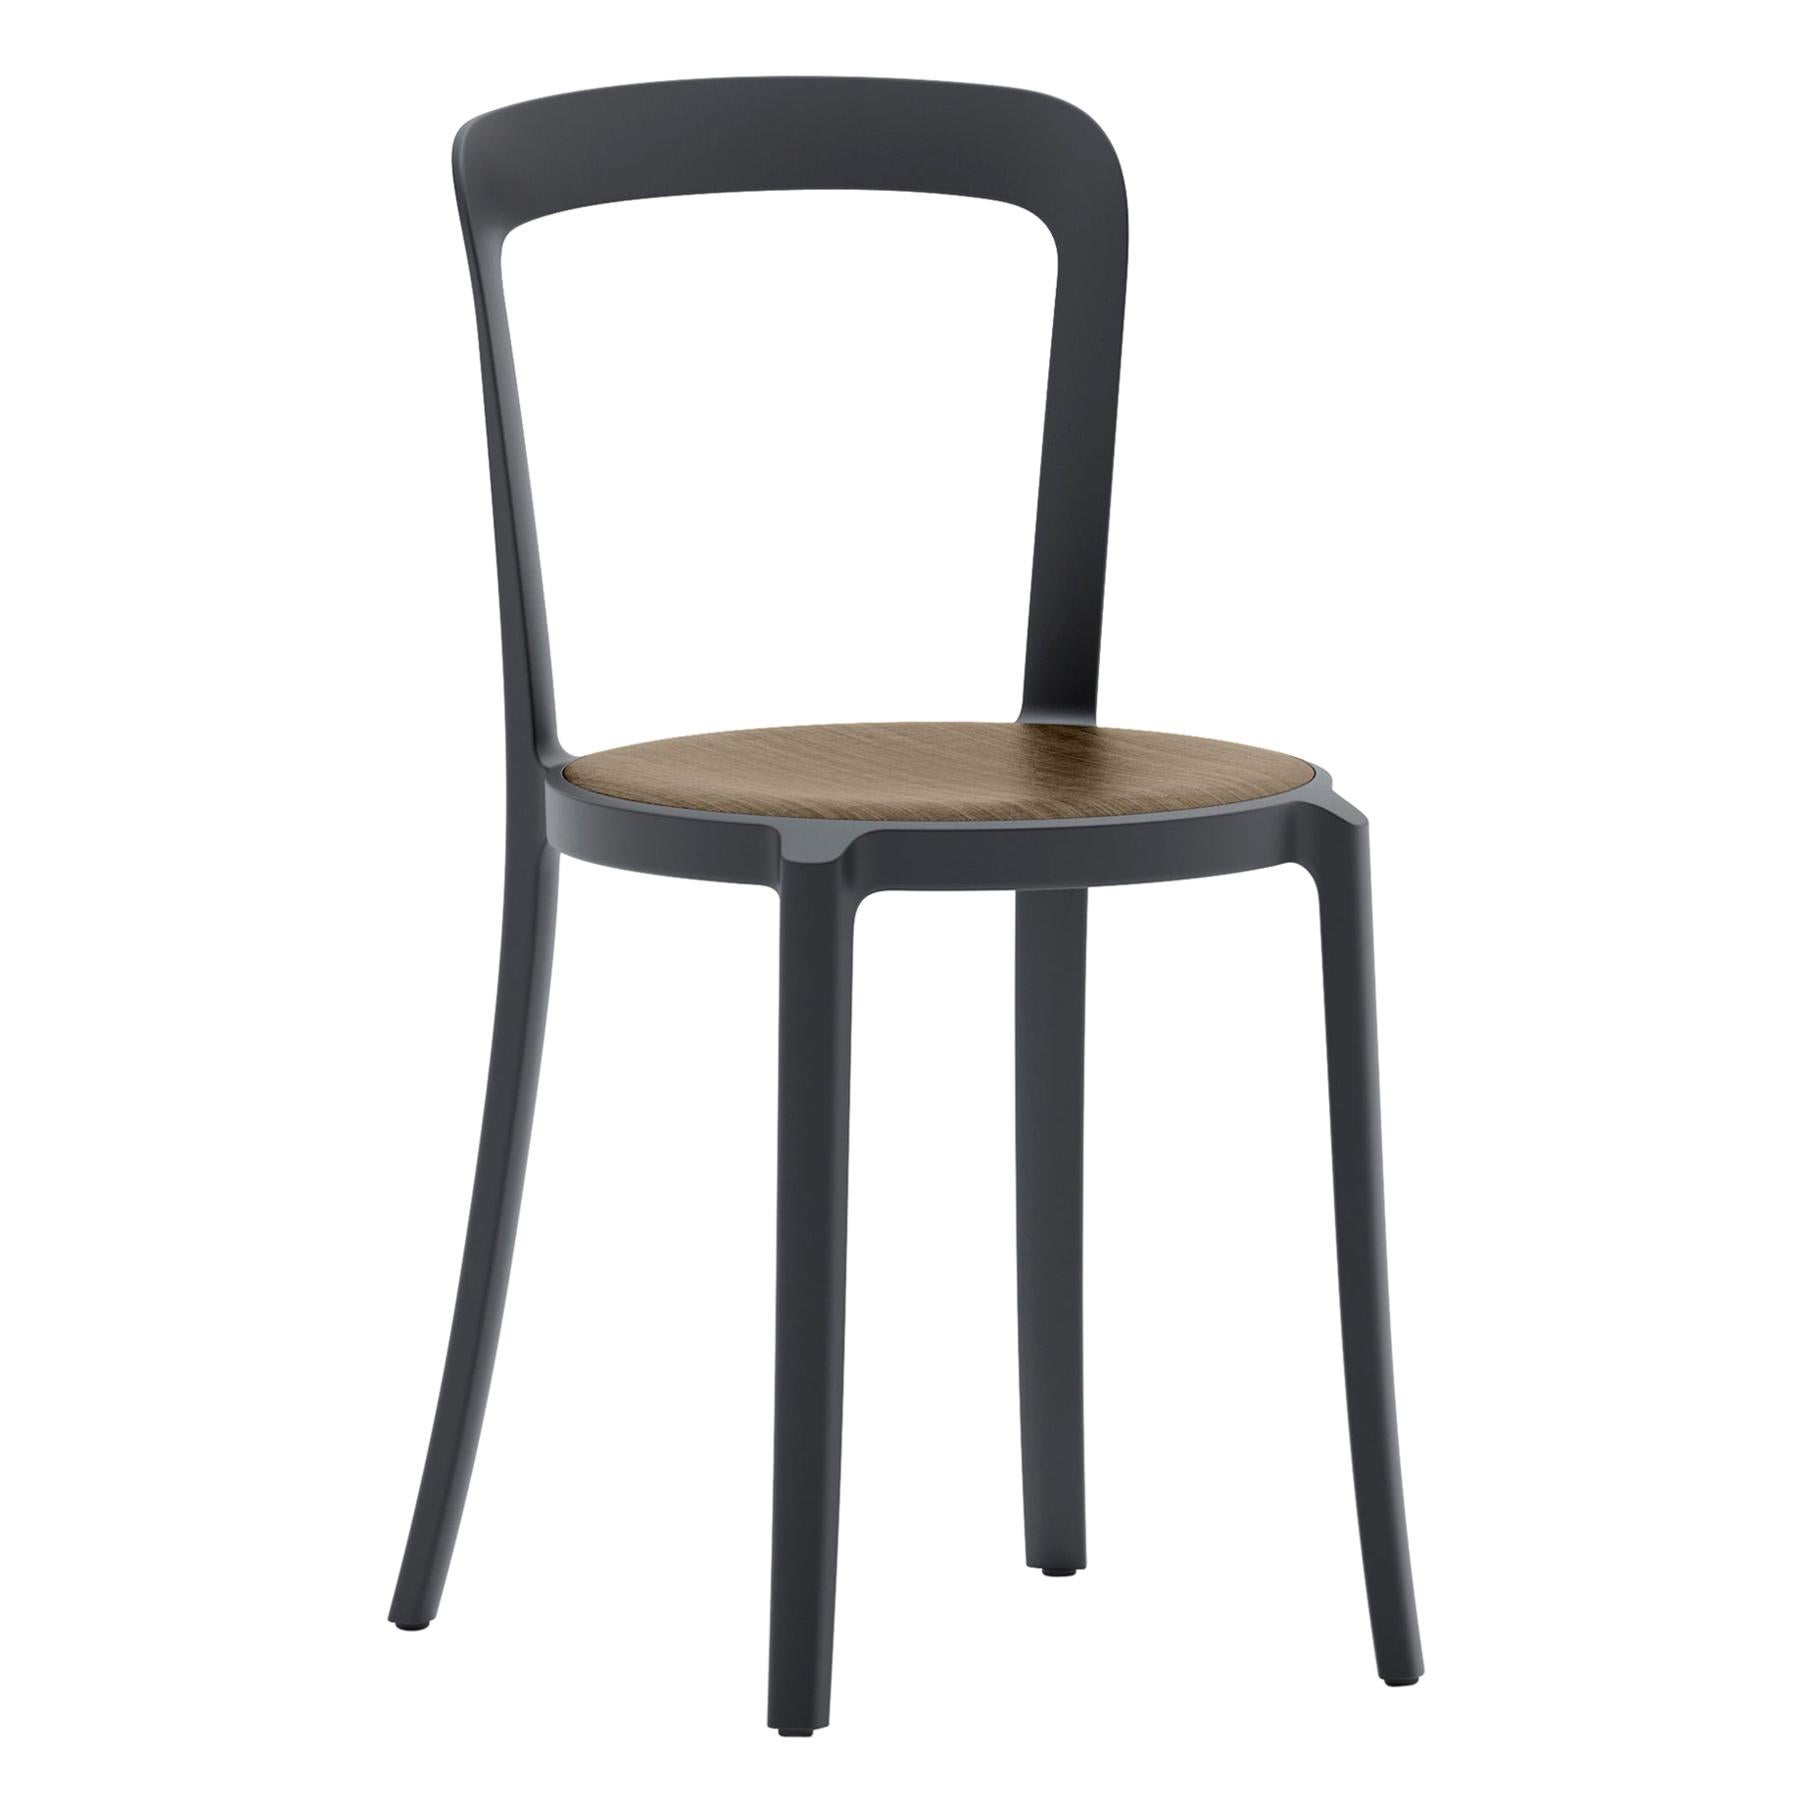 Emeco On & On Stacking Chair in Black with Walnut seat by Barber & Osgerby